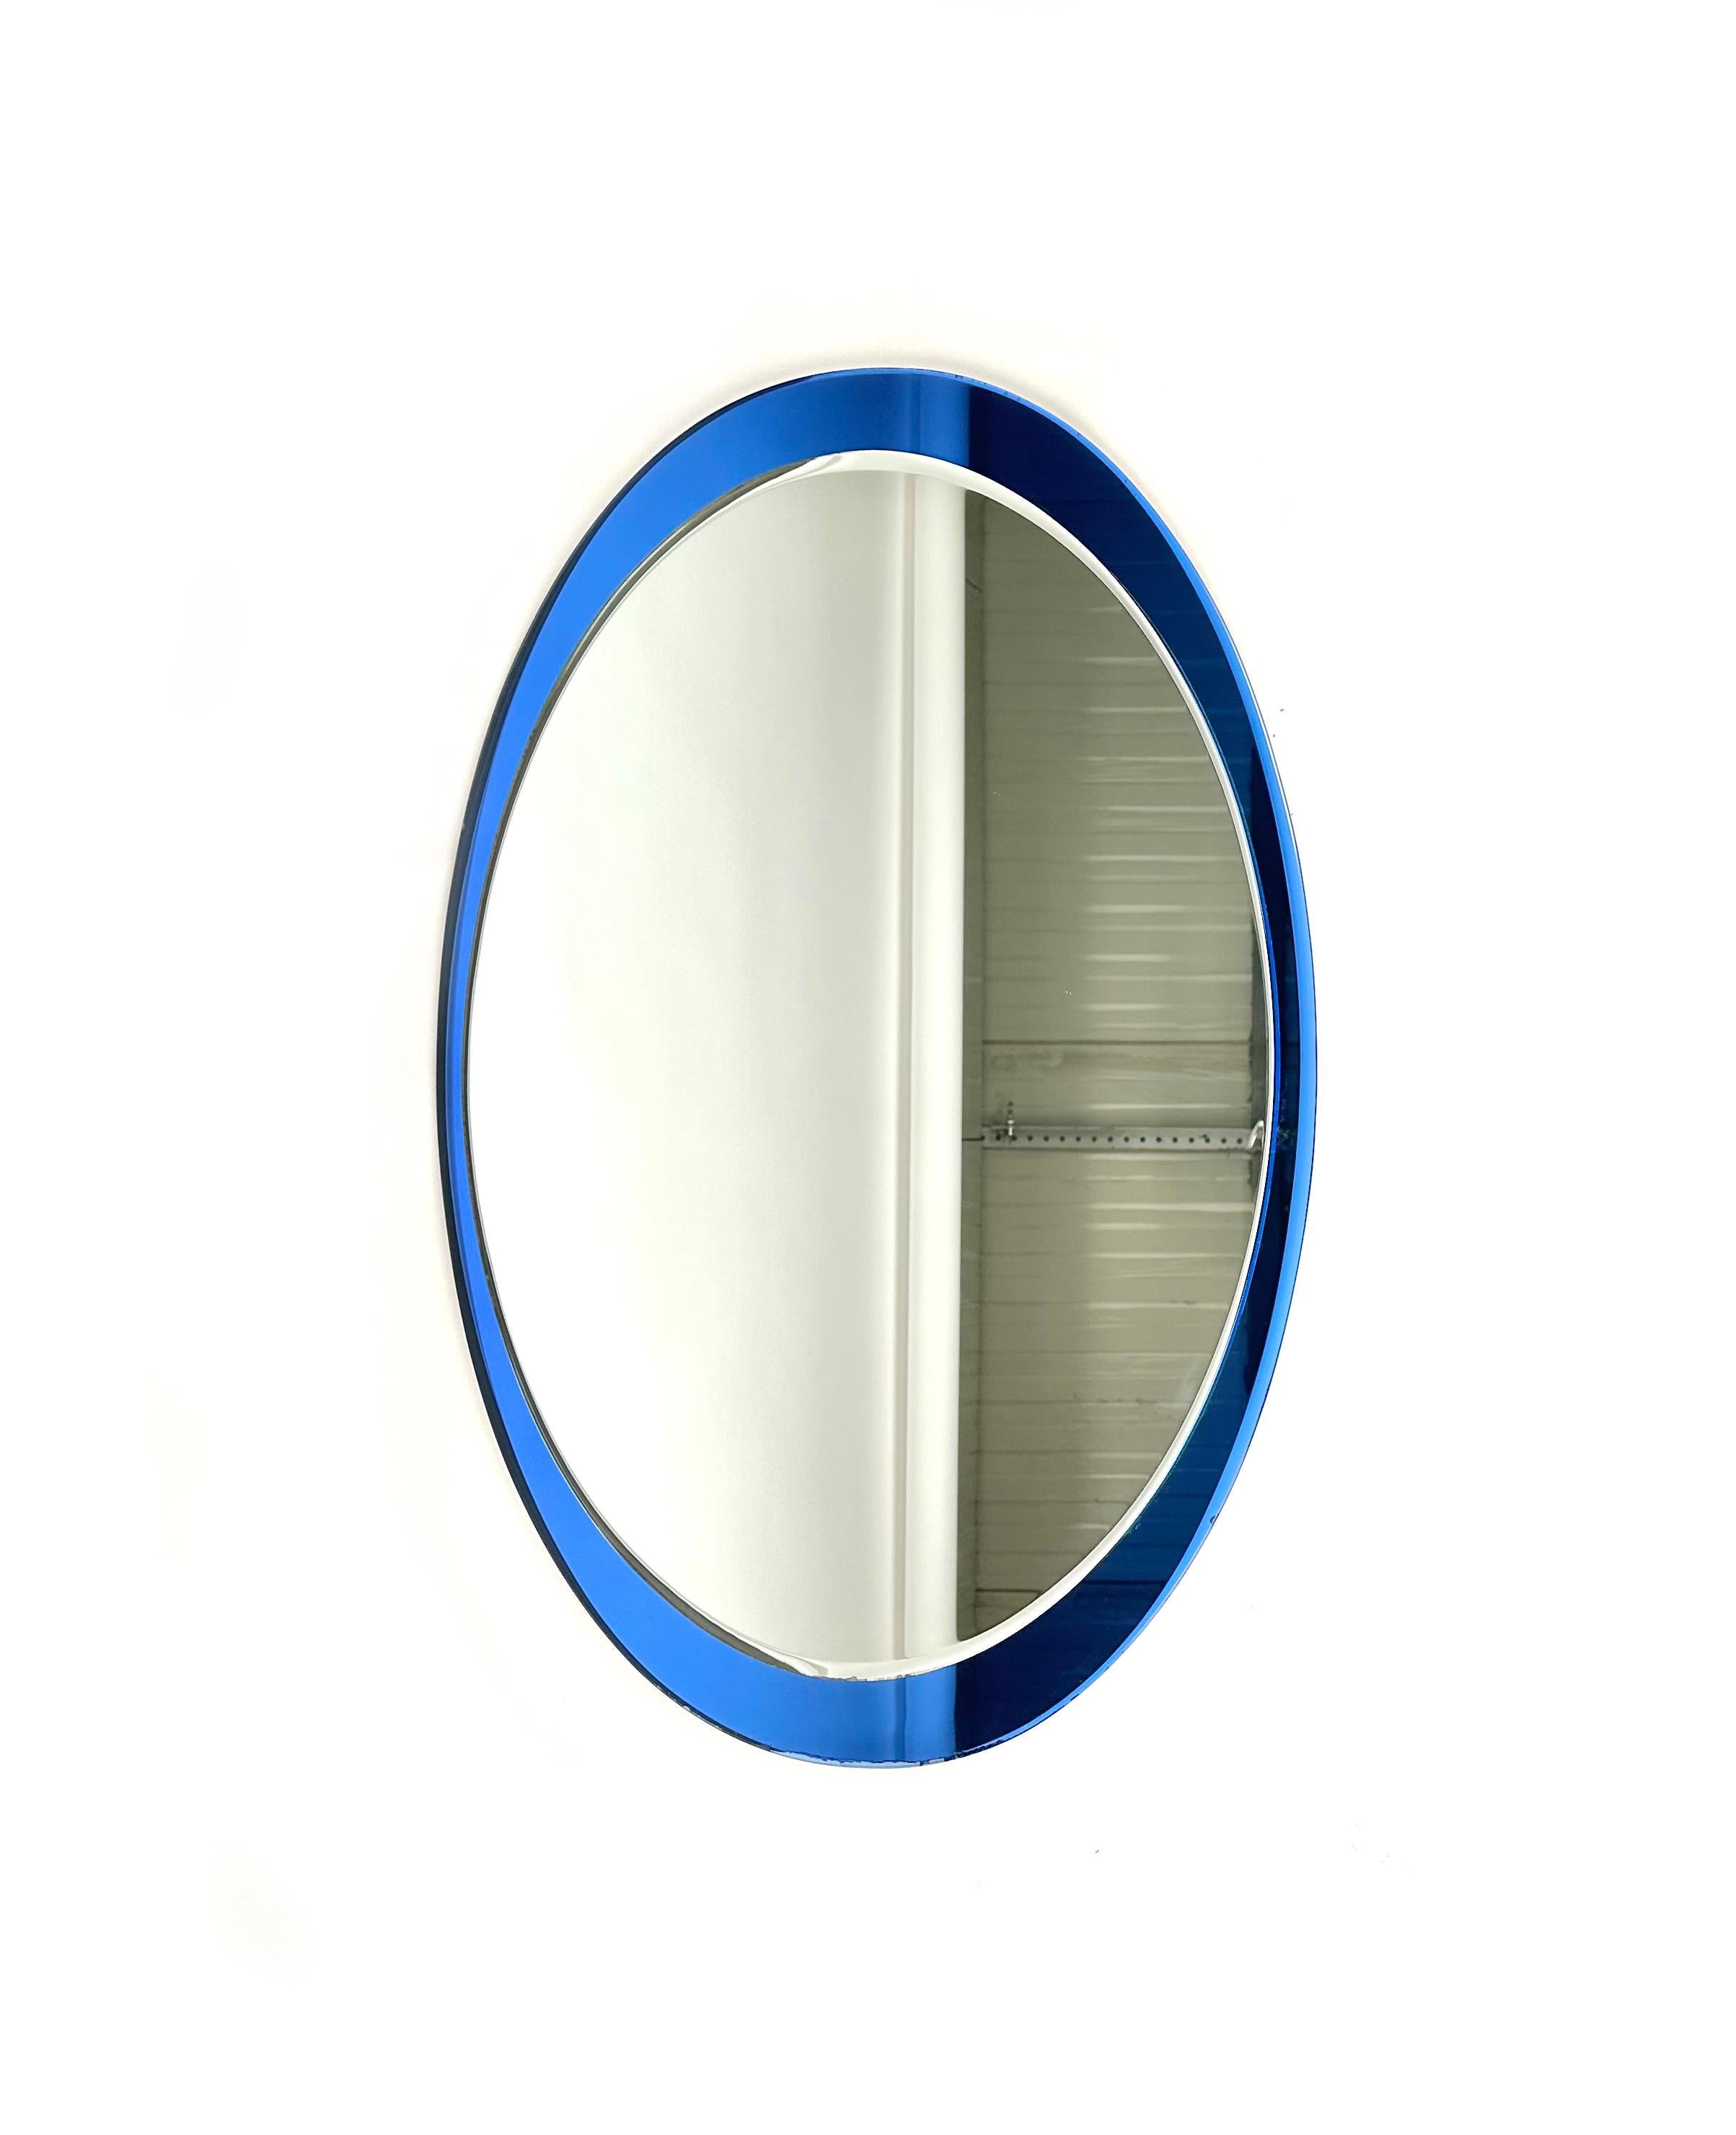 Late 20th Century Midcentury Oval Blue Wall Mirror by Metalvetro Galvorame, Italy, 1970s